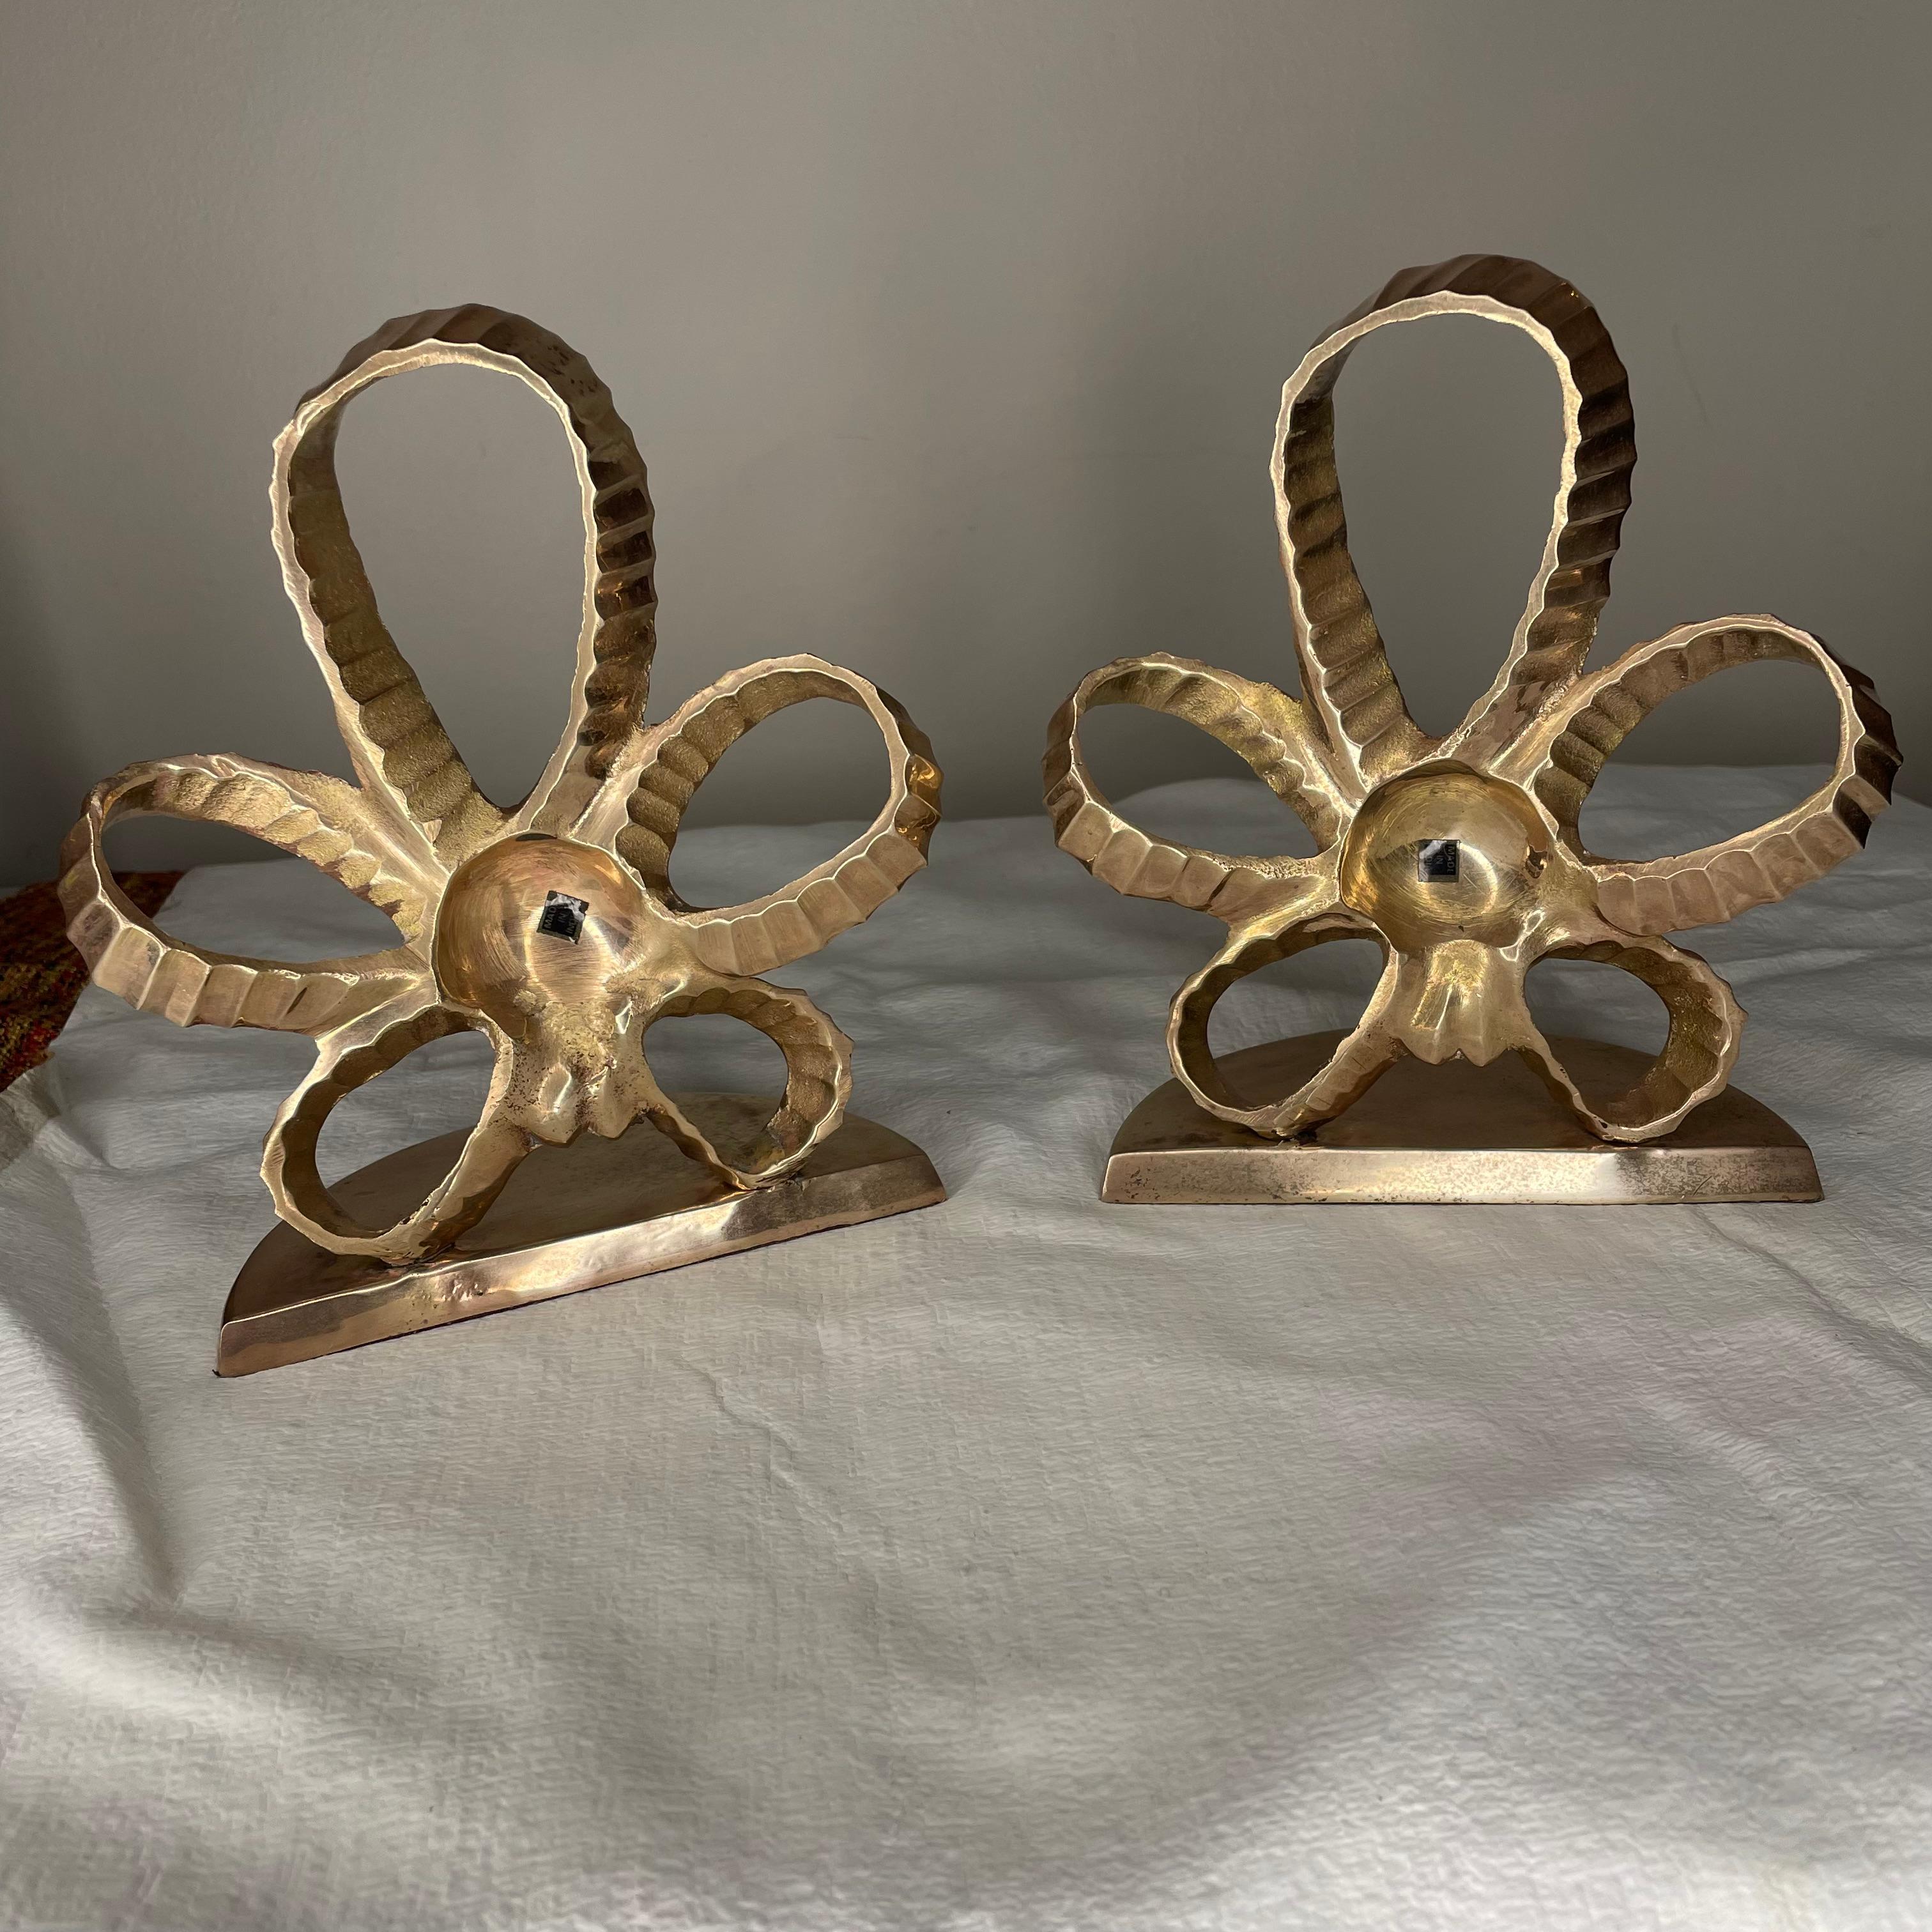 Pair of polished brass bookends with a brass faux ribbon detailing in the shape of a star. Both pieces are made of solid brass which has recently been polished. No lacquer coating on top allowing for patina to set in over time.